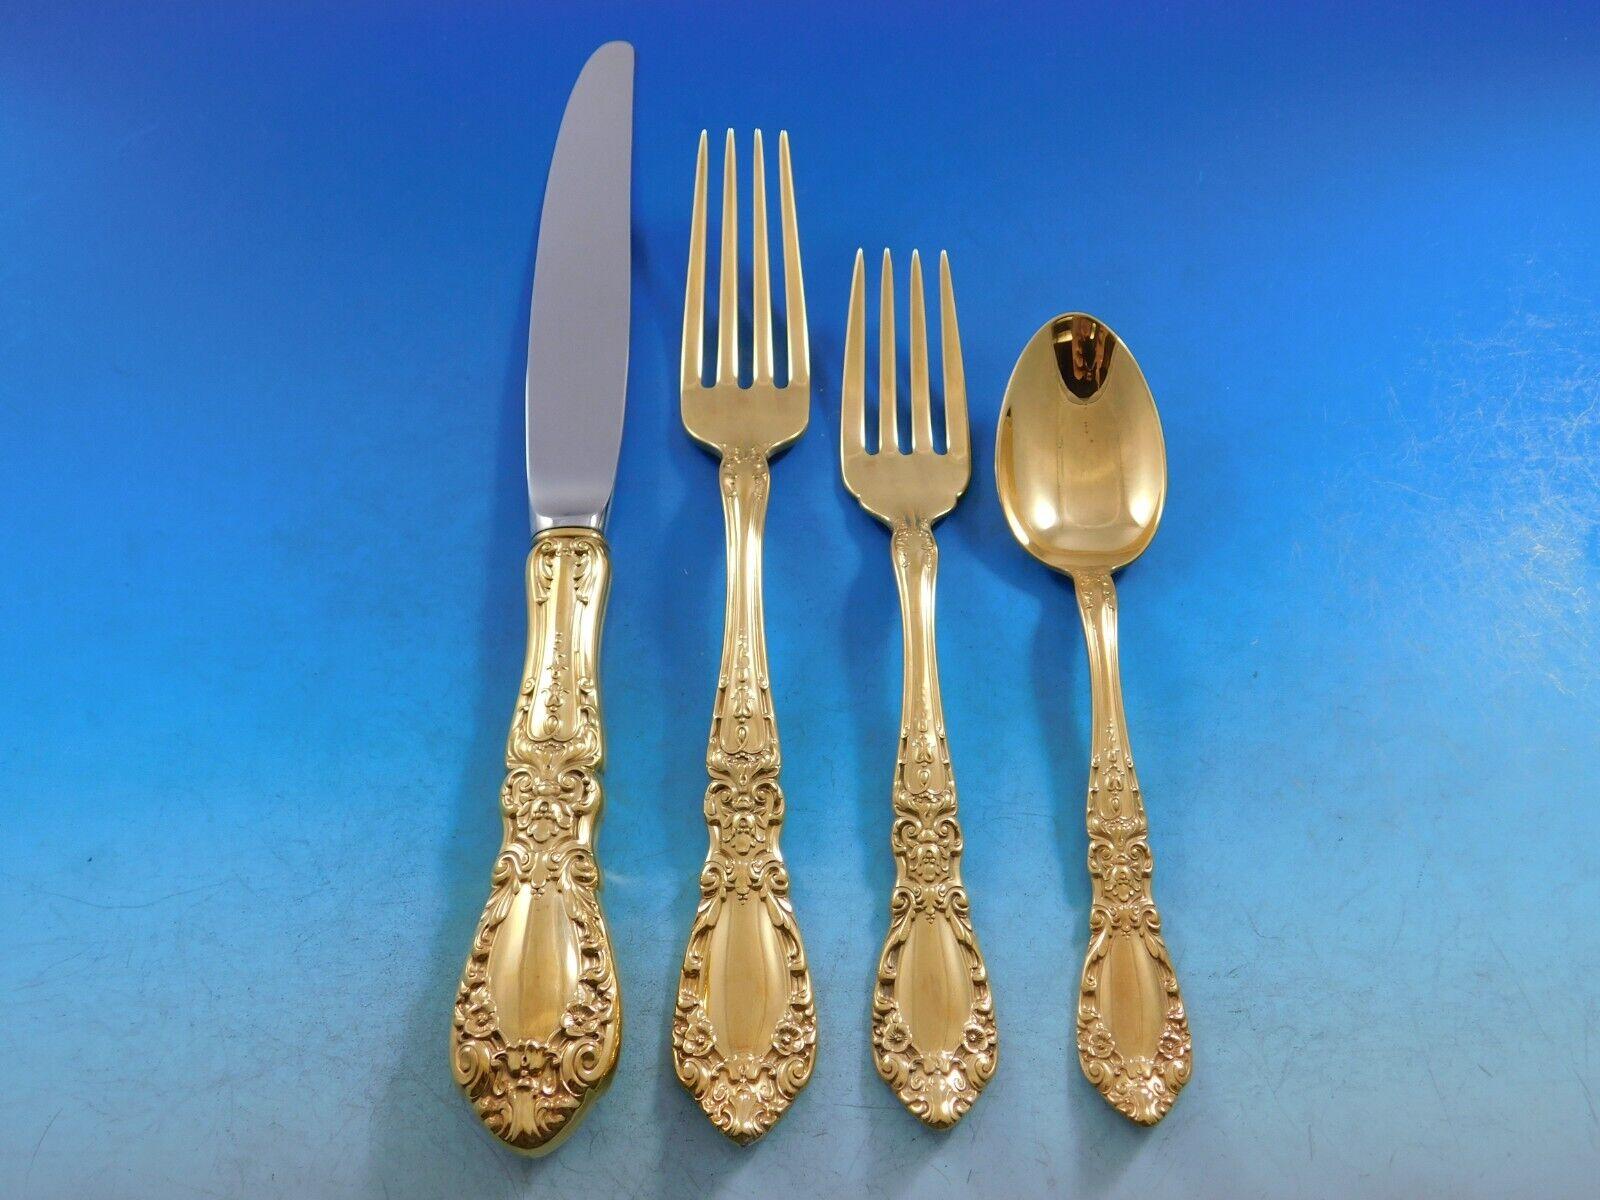 Dinner & Luncheon Size Prince Eugene Gold by Alvin Sterling Silver flatware set - 85 pieces. This set includes:

12 Dinner Size Knives, 9 1/2